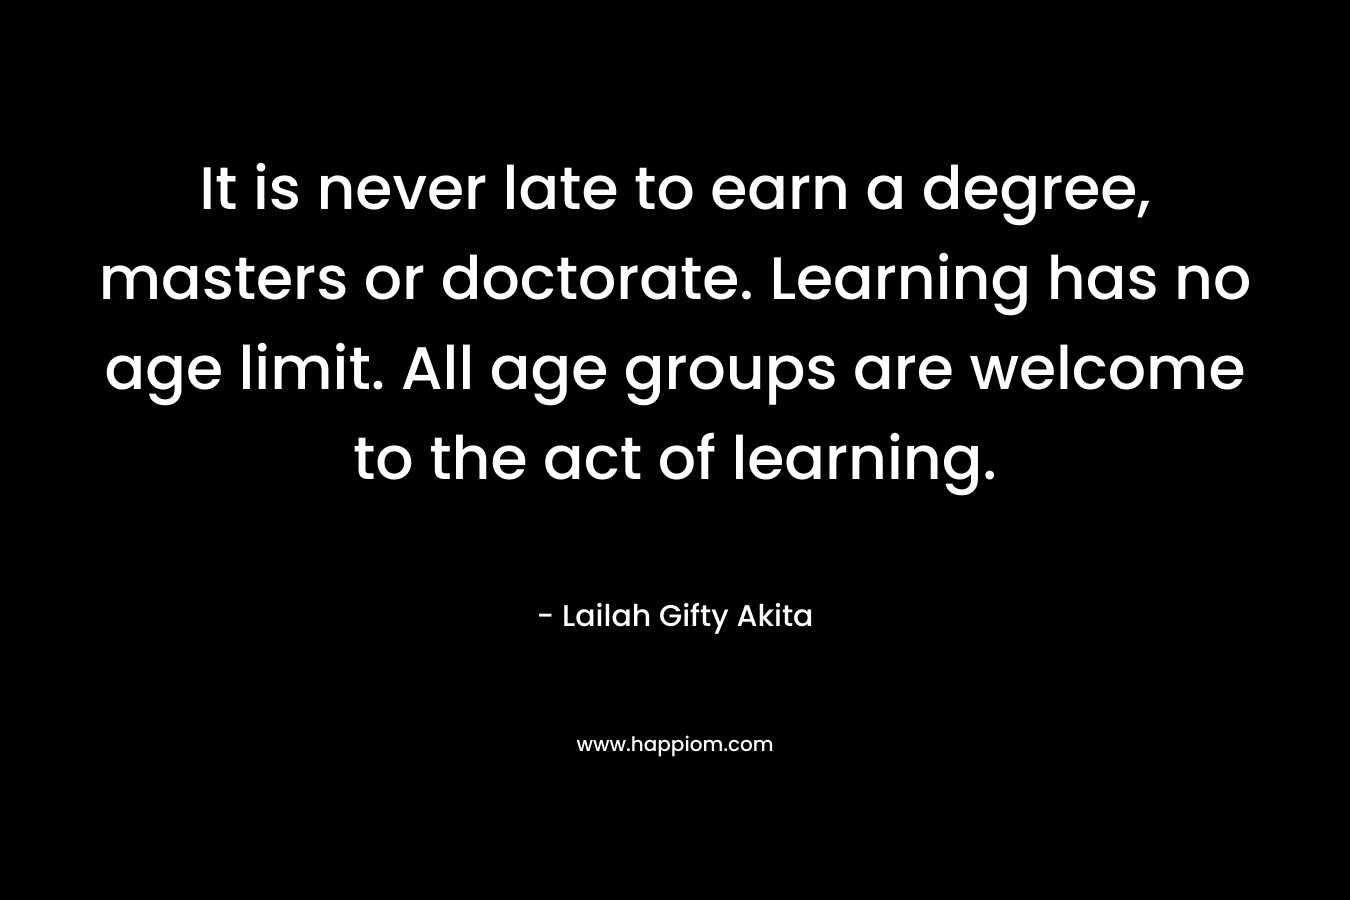 It is never late to earn a degree, masters or doctorate. Learning has no age limit. All age groups are welcome to the act of learning.